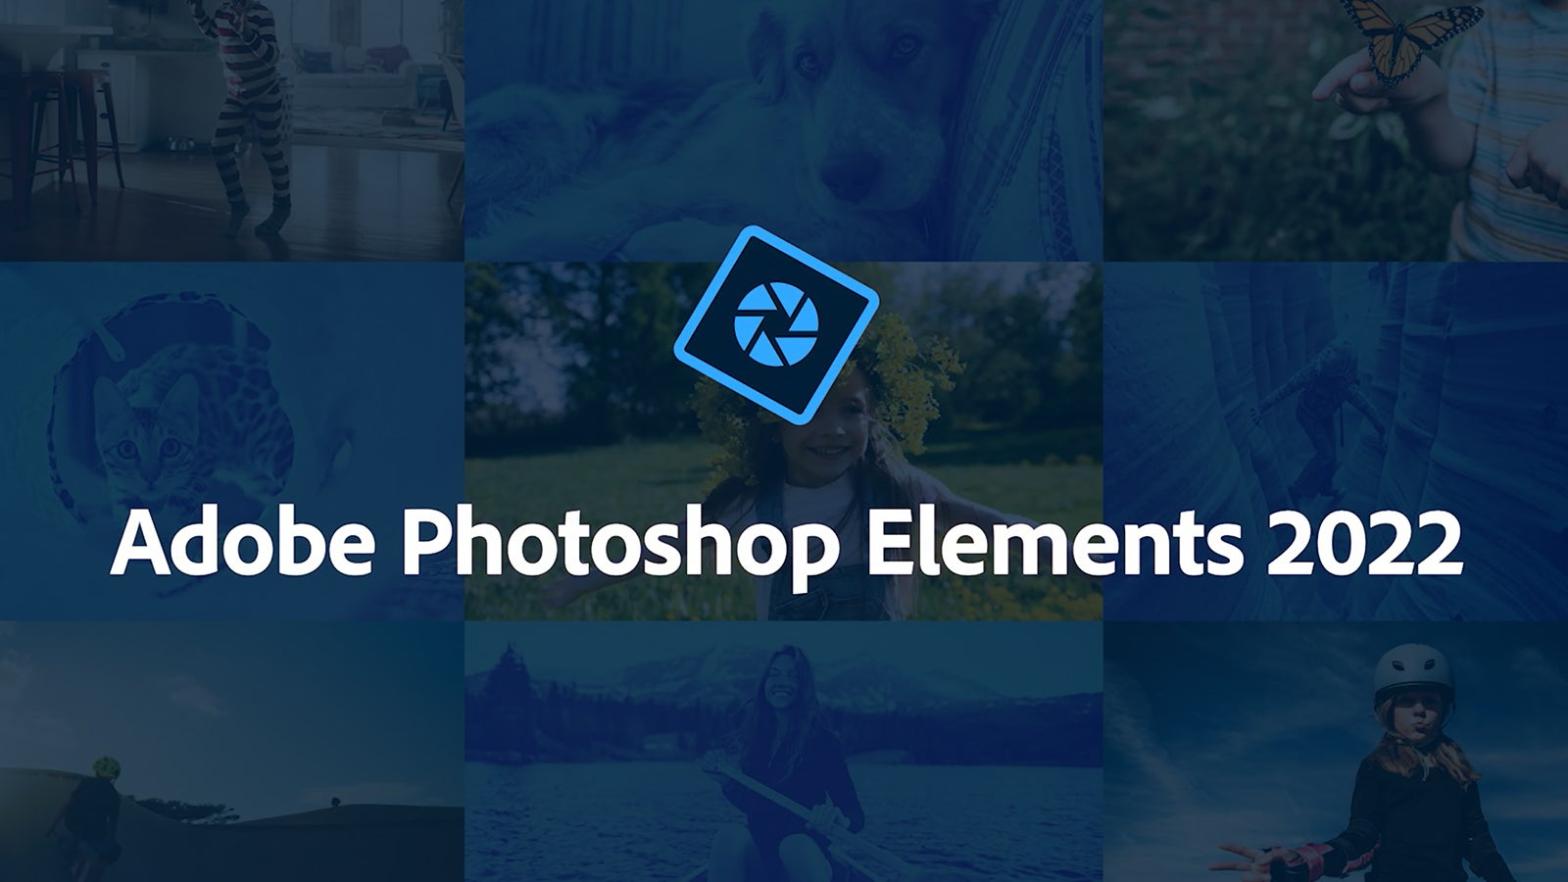 Get to know Photoshop Elements a little bit better. (Image: Adobe)